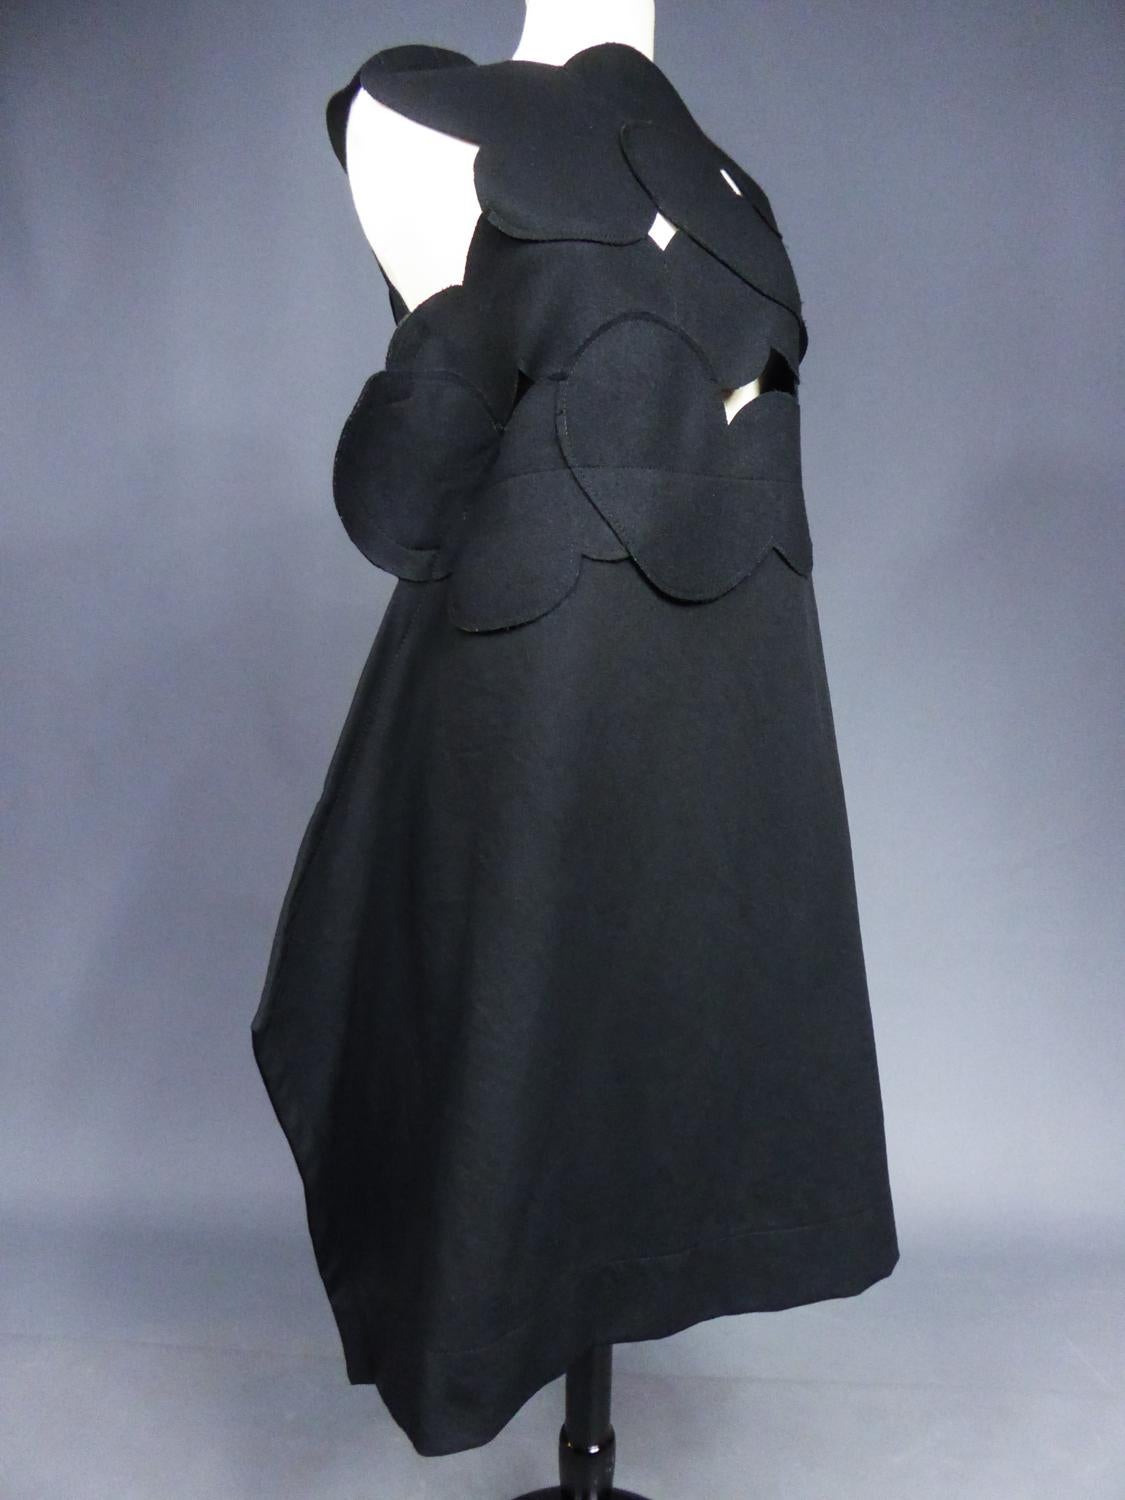 A Comme des Garcons Junya Watanabe Black Woollen Chasuble Dress Circa 2000 For Sale 4